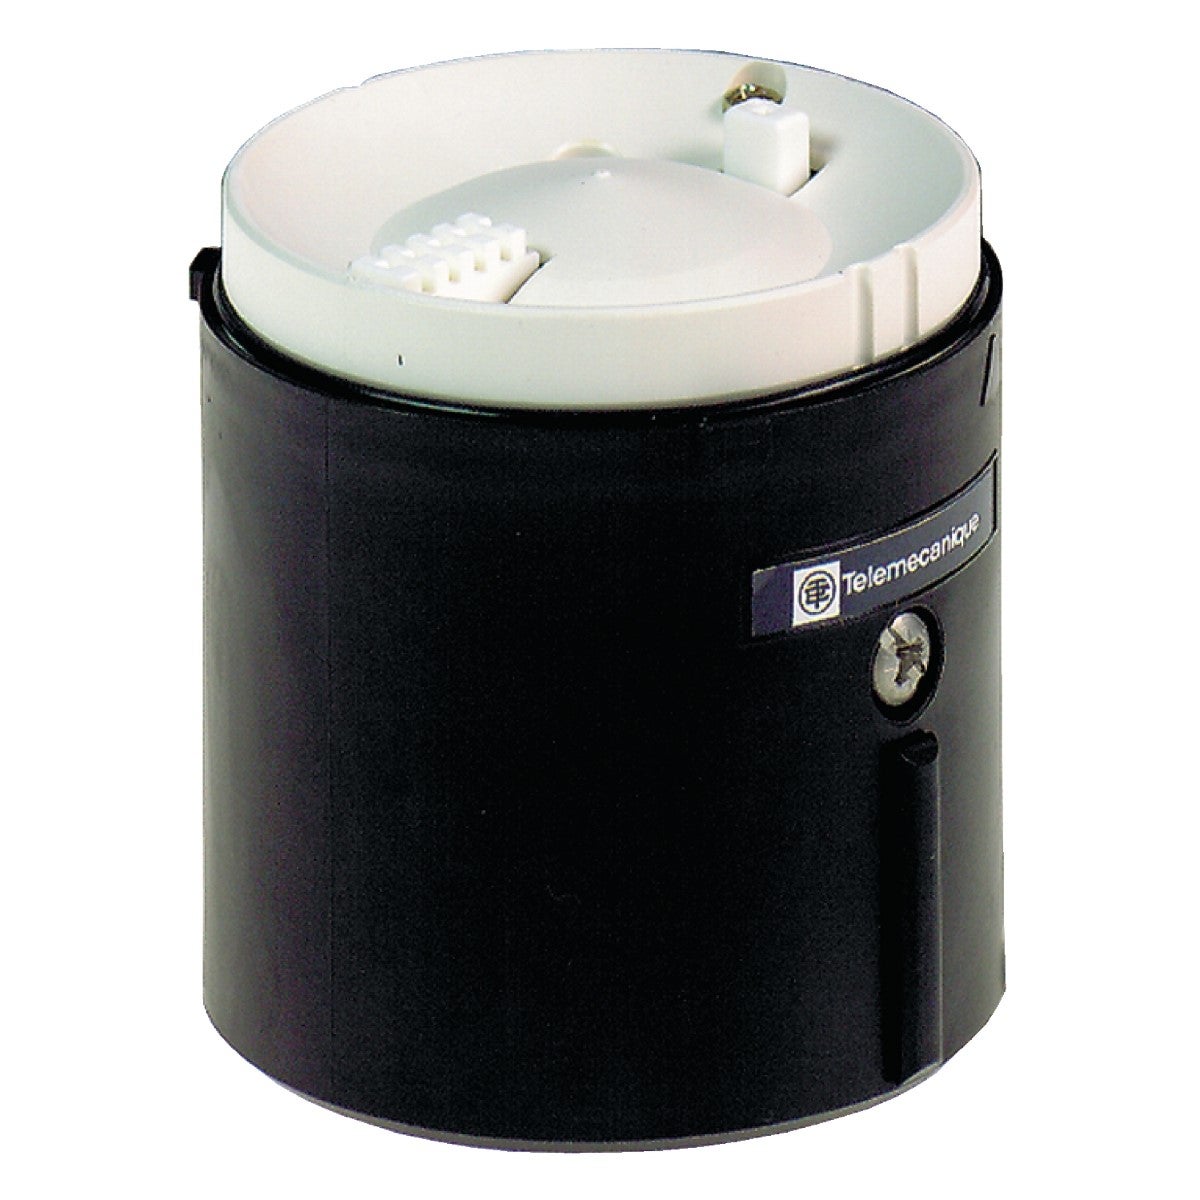 Base unit for modular tower lights, Harmony XVB, plastic, black, 70mm, bottom or side cable entry